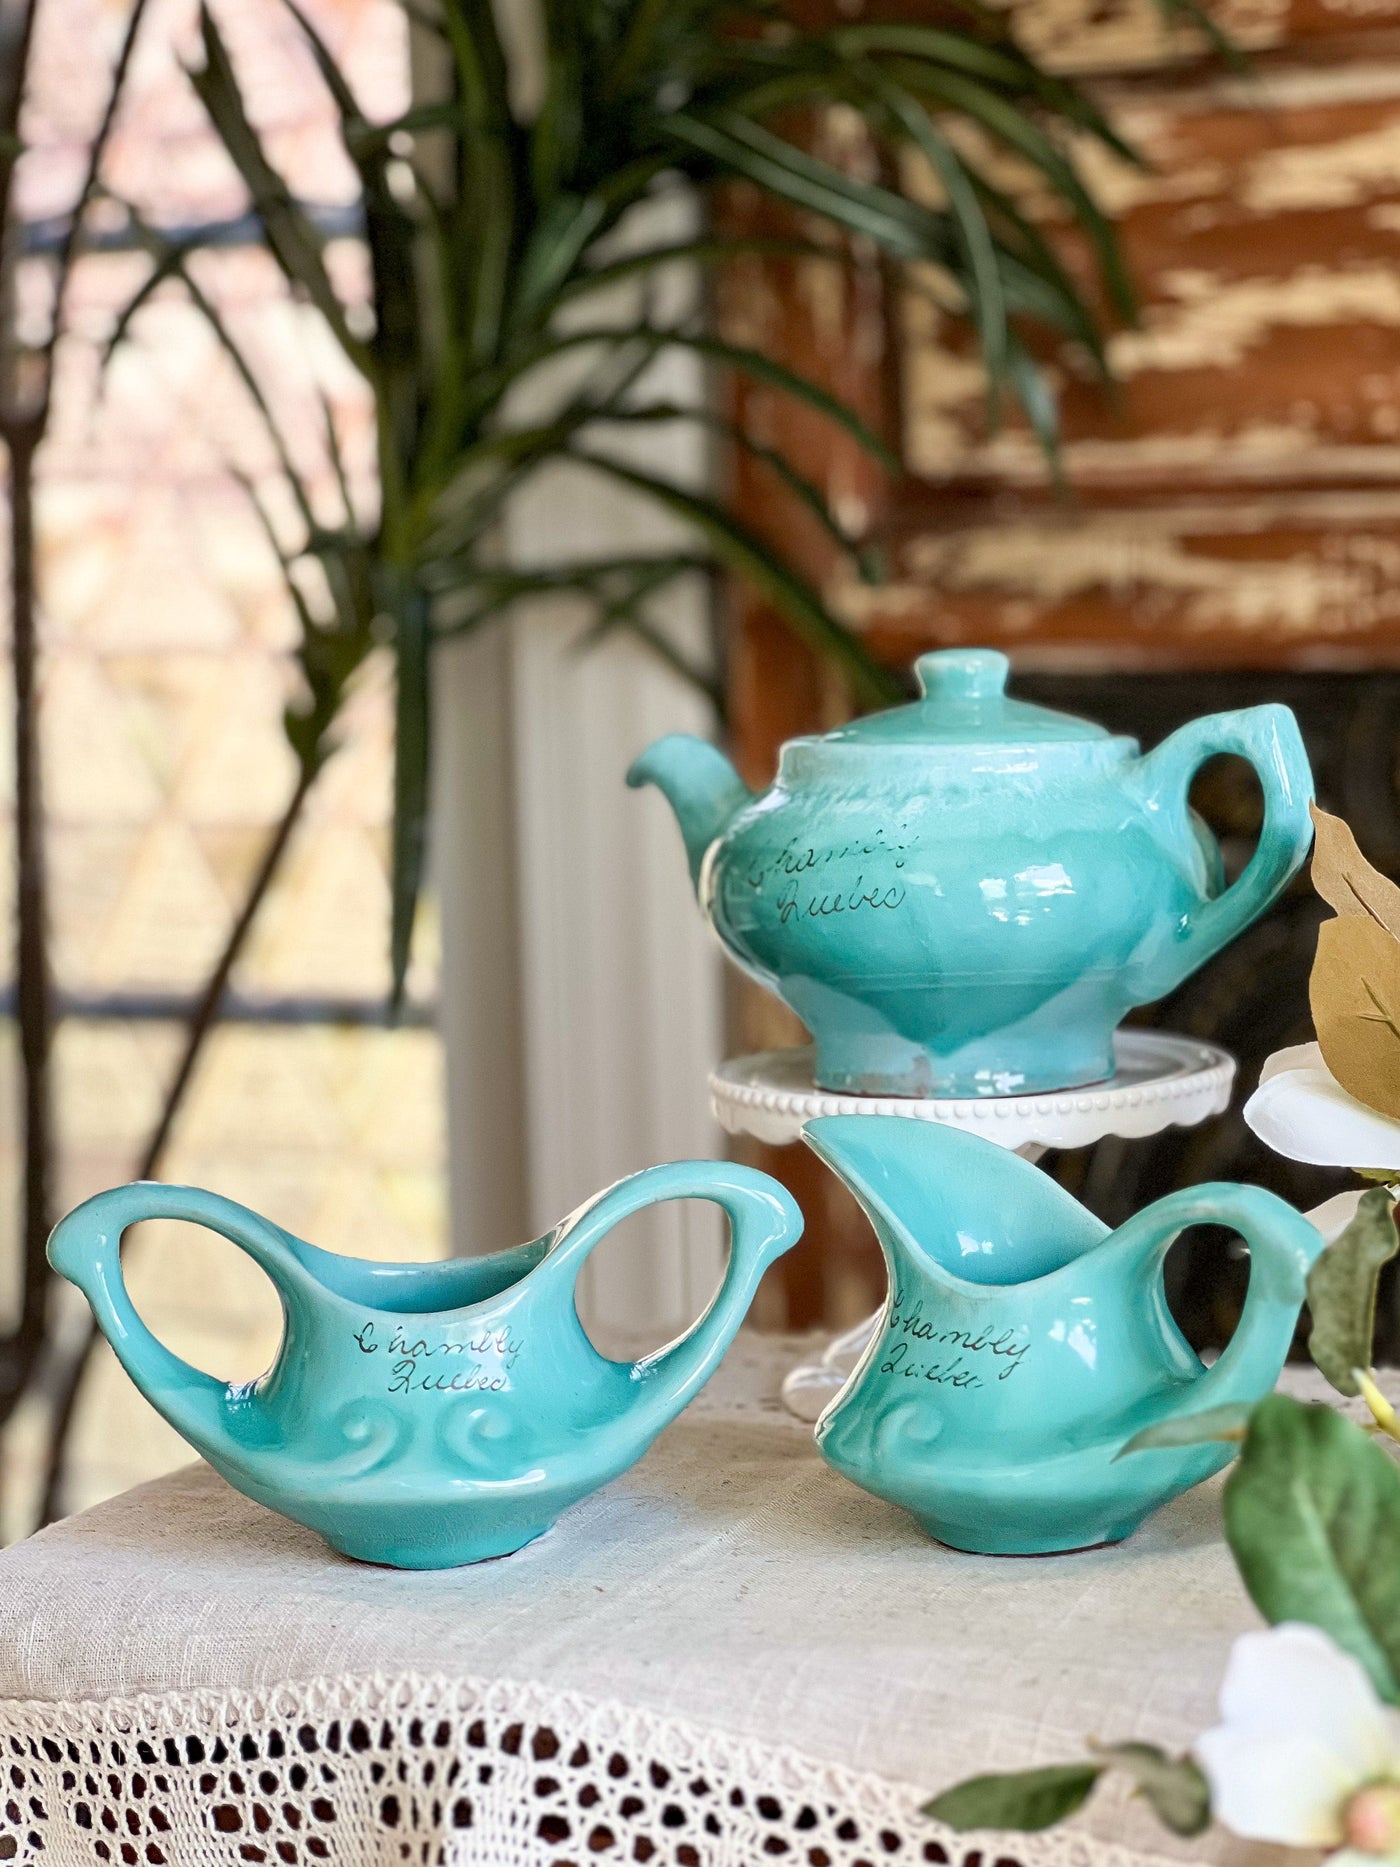 Turquoise Vintage Evangeline Canada Pottery Tea Set (1960's) Revive In Style Vintage Furniture Painted Refinished Redesign Beautiful One of a Kind Artistic Antique Unique Home Decor Interior Design French Country Shabby Chic Cottage Farmhouse Grandmillenial Coastal Chalk Paint Metallic Glam Eclectic Quality Dovetailed Rustic Furniture Painter Pinterest Bedroom Living Room Entryway Kitchen Home Trends House Styles Decorating ideas